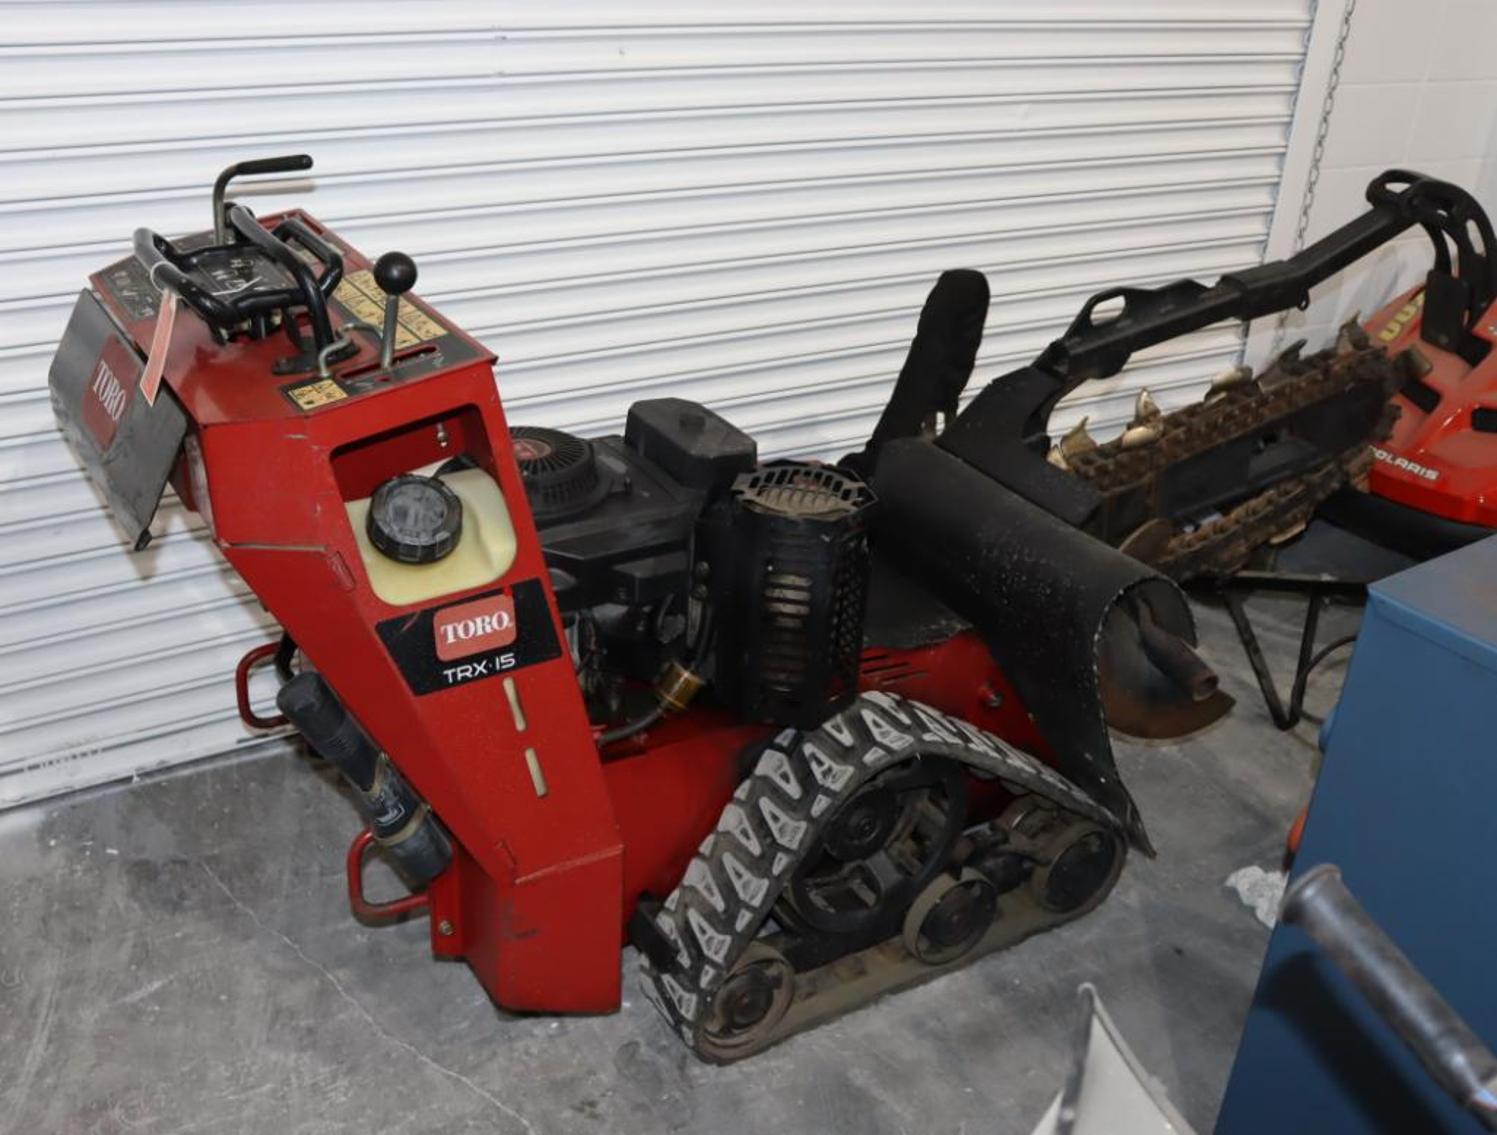 Trenchers, Vehicles, Insulation Blowers, Lawn Mower, Tractor, Shop Equipment